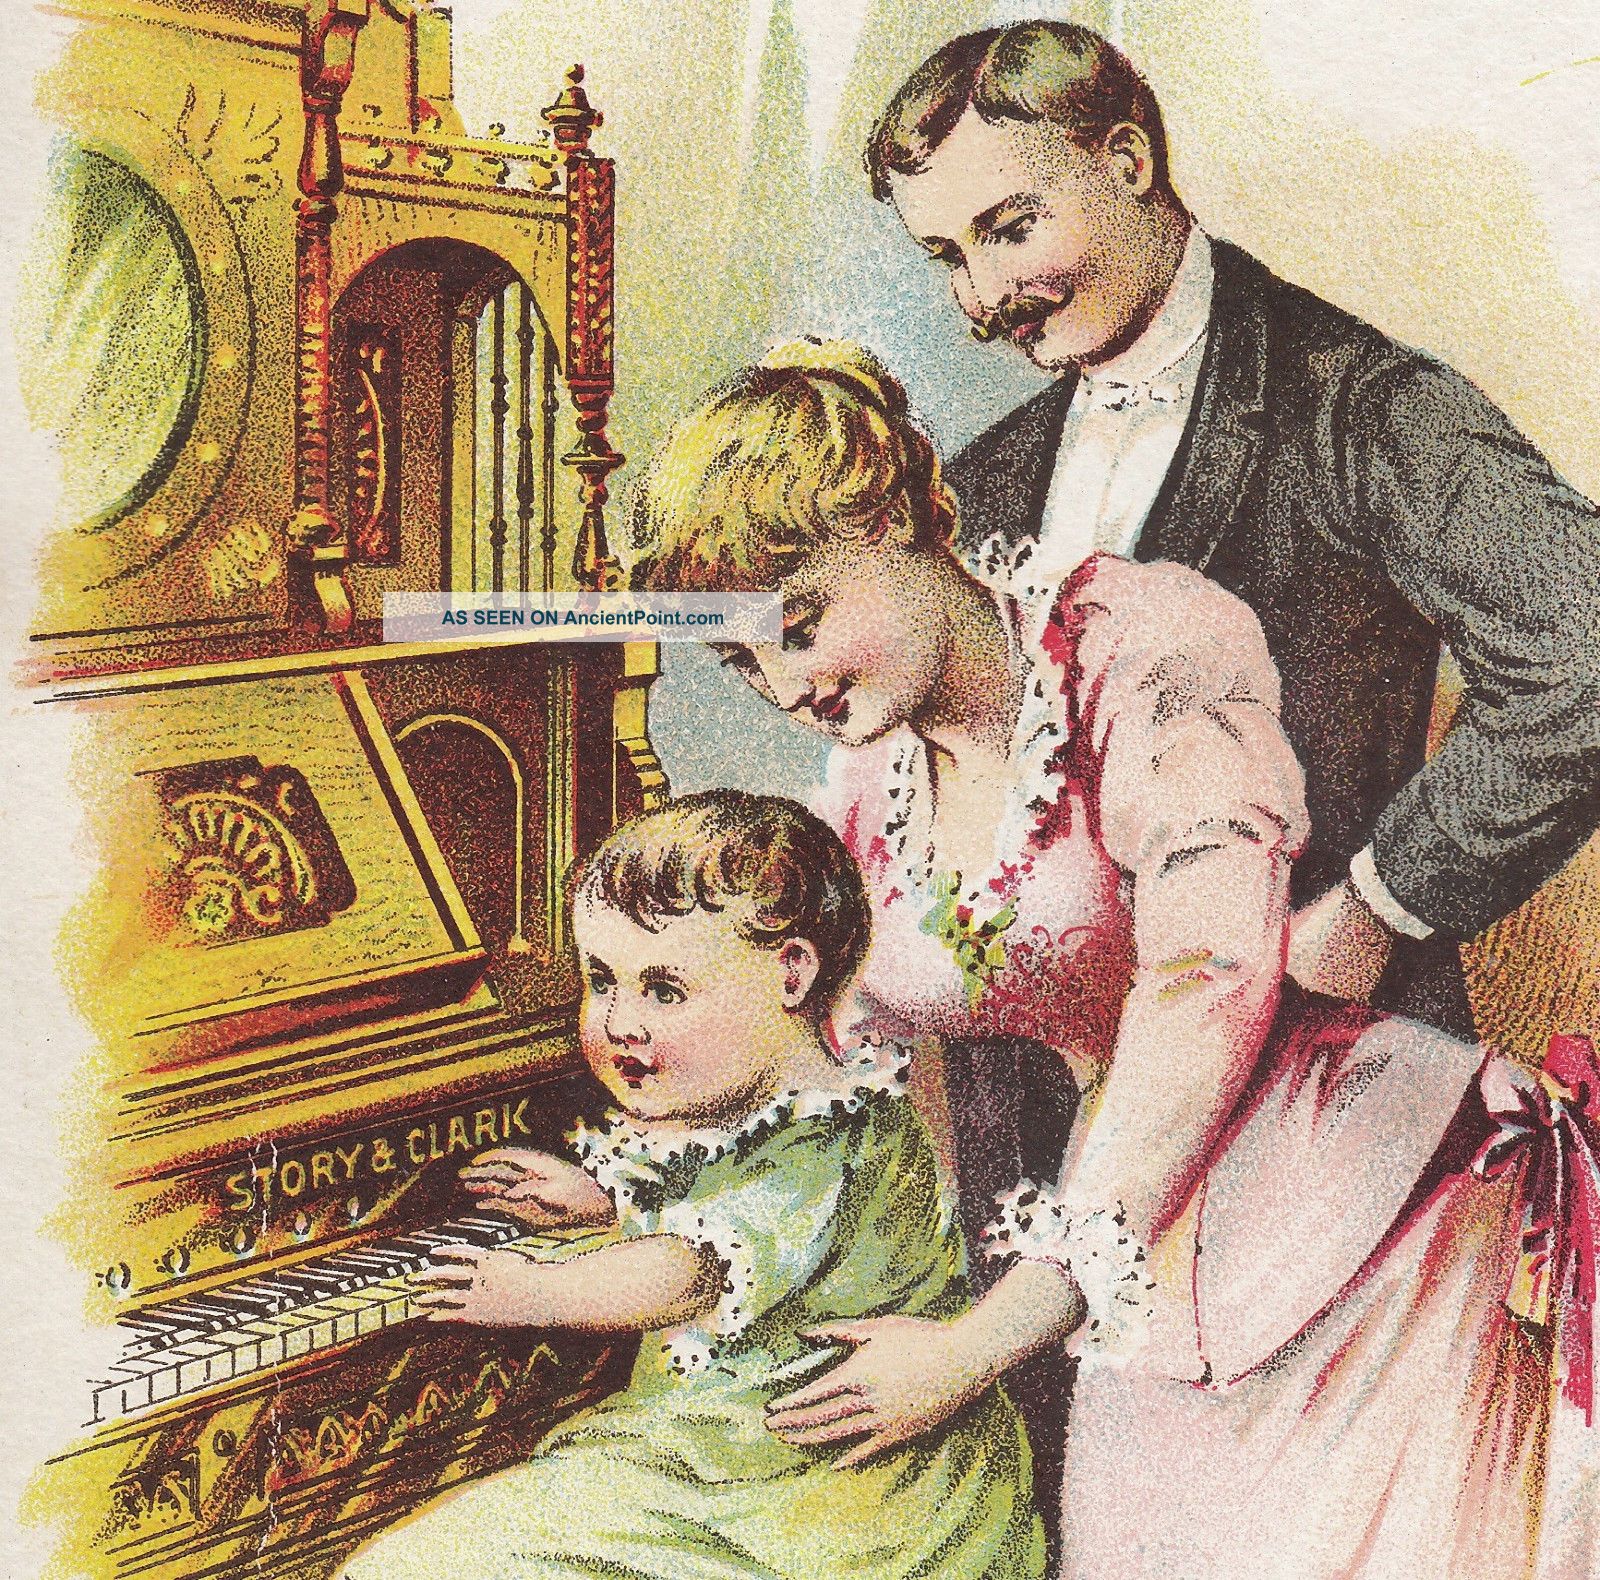 Story & Clark Organ Co Chicago Victorian Advertising Trade Card The First Lesson Keyboard photo